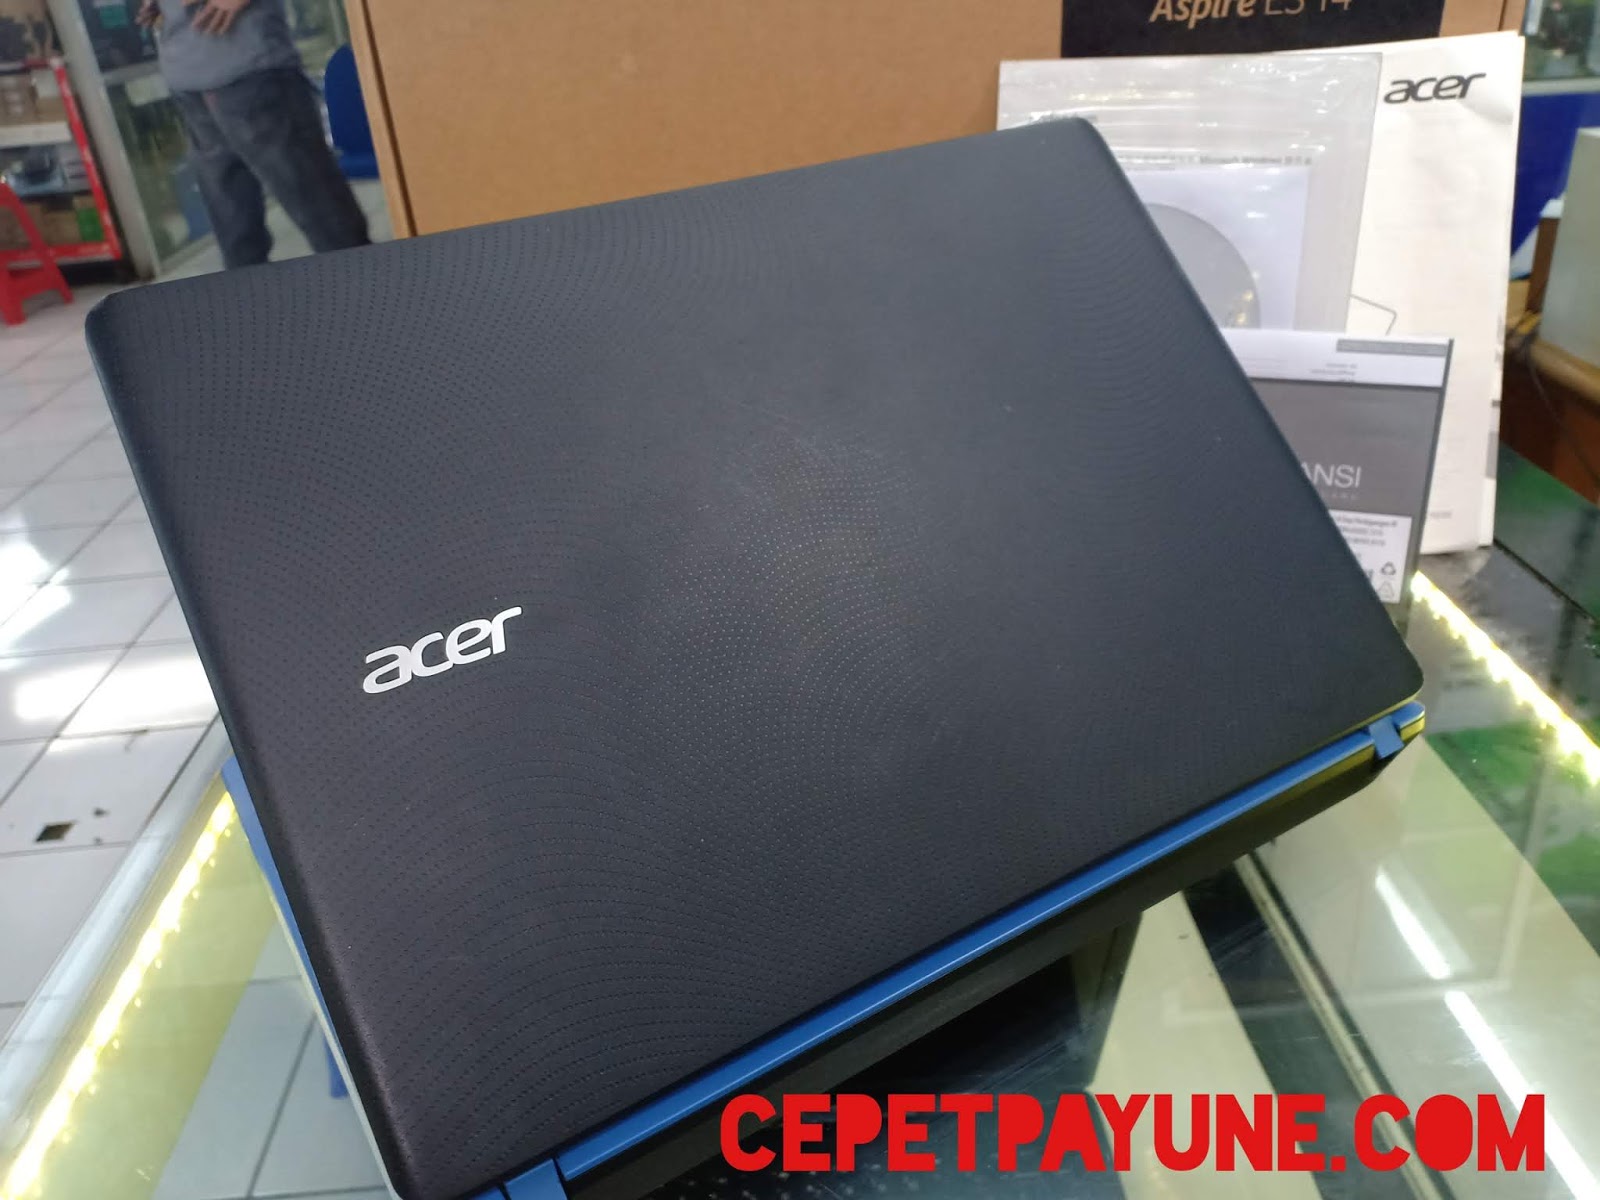 Acer es series 3 plus aes103. Ноутбук Acer es1- 521 -21st батарея биоса. Acer es1 520 фото дома.